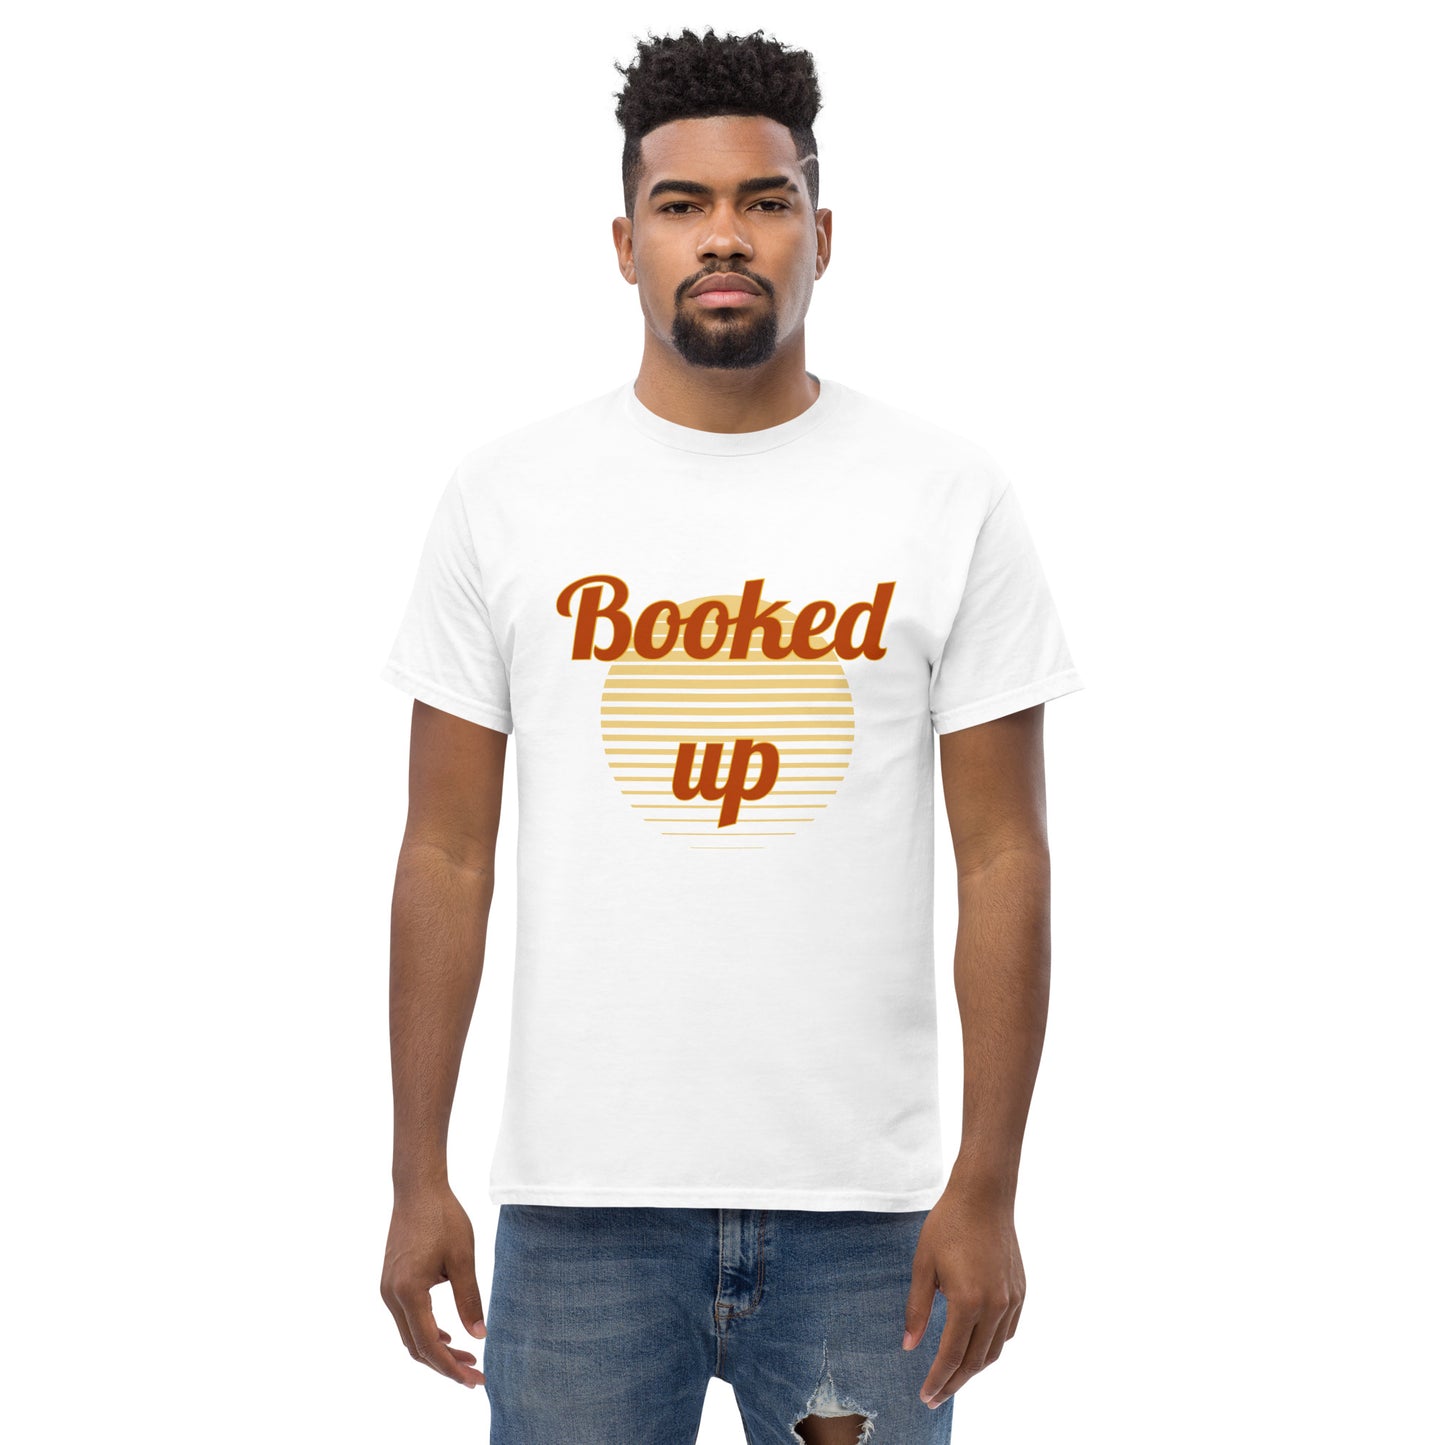 Booked up  classic tee